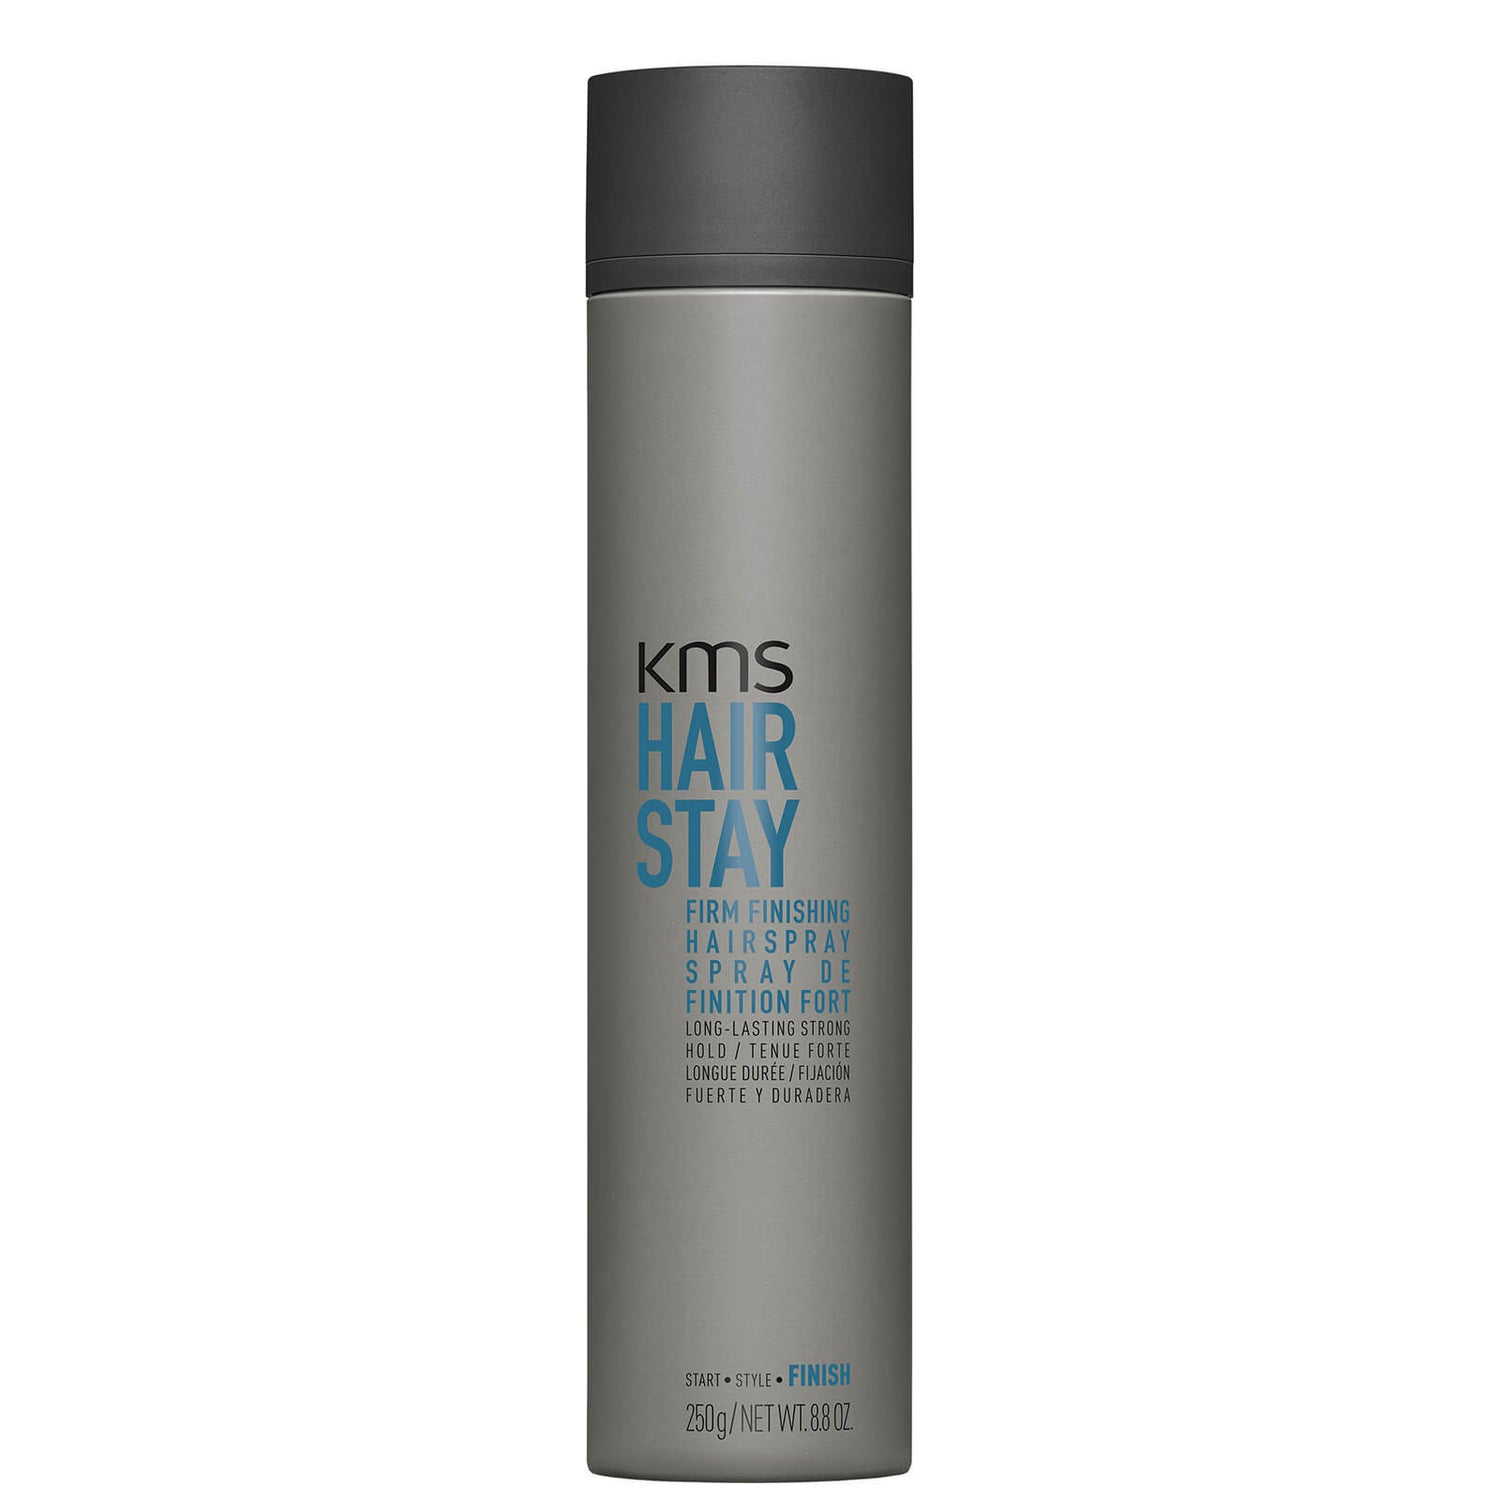 Spray de Finition Fort HairStay KMS 300 ml